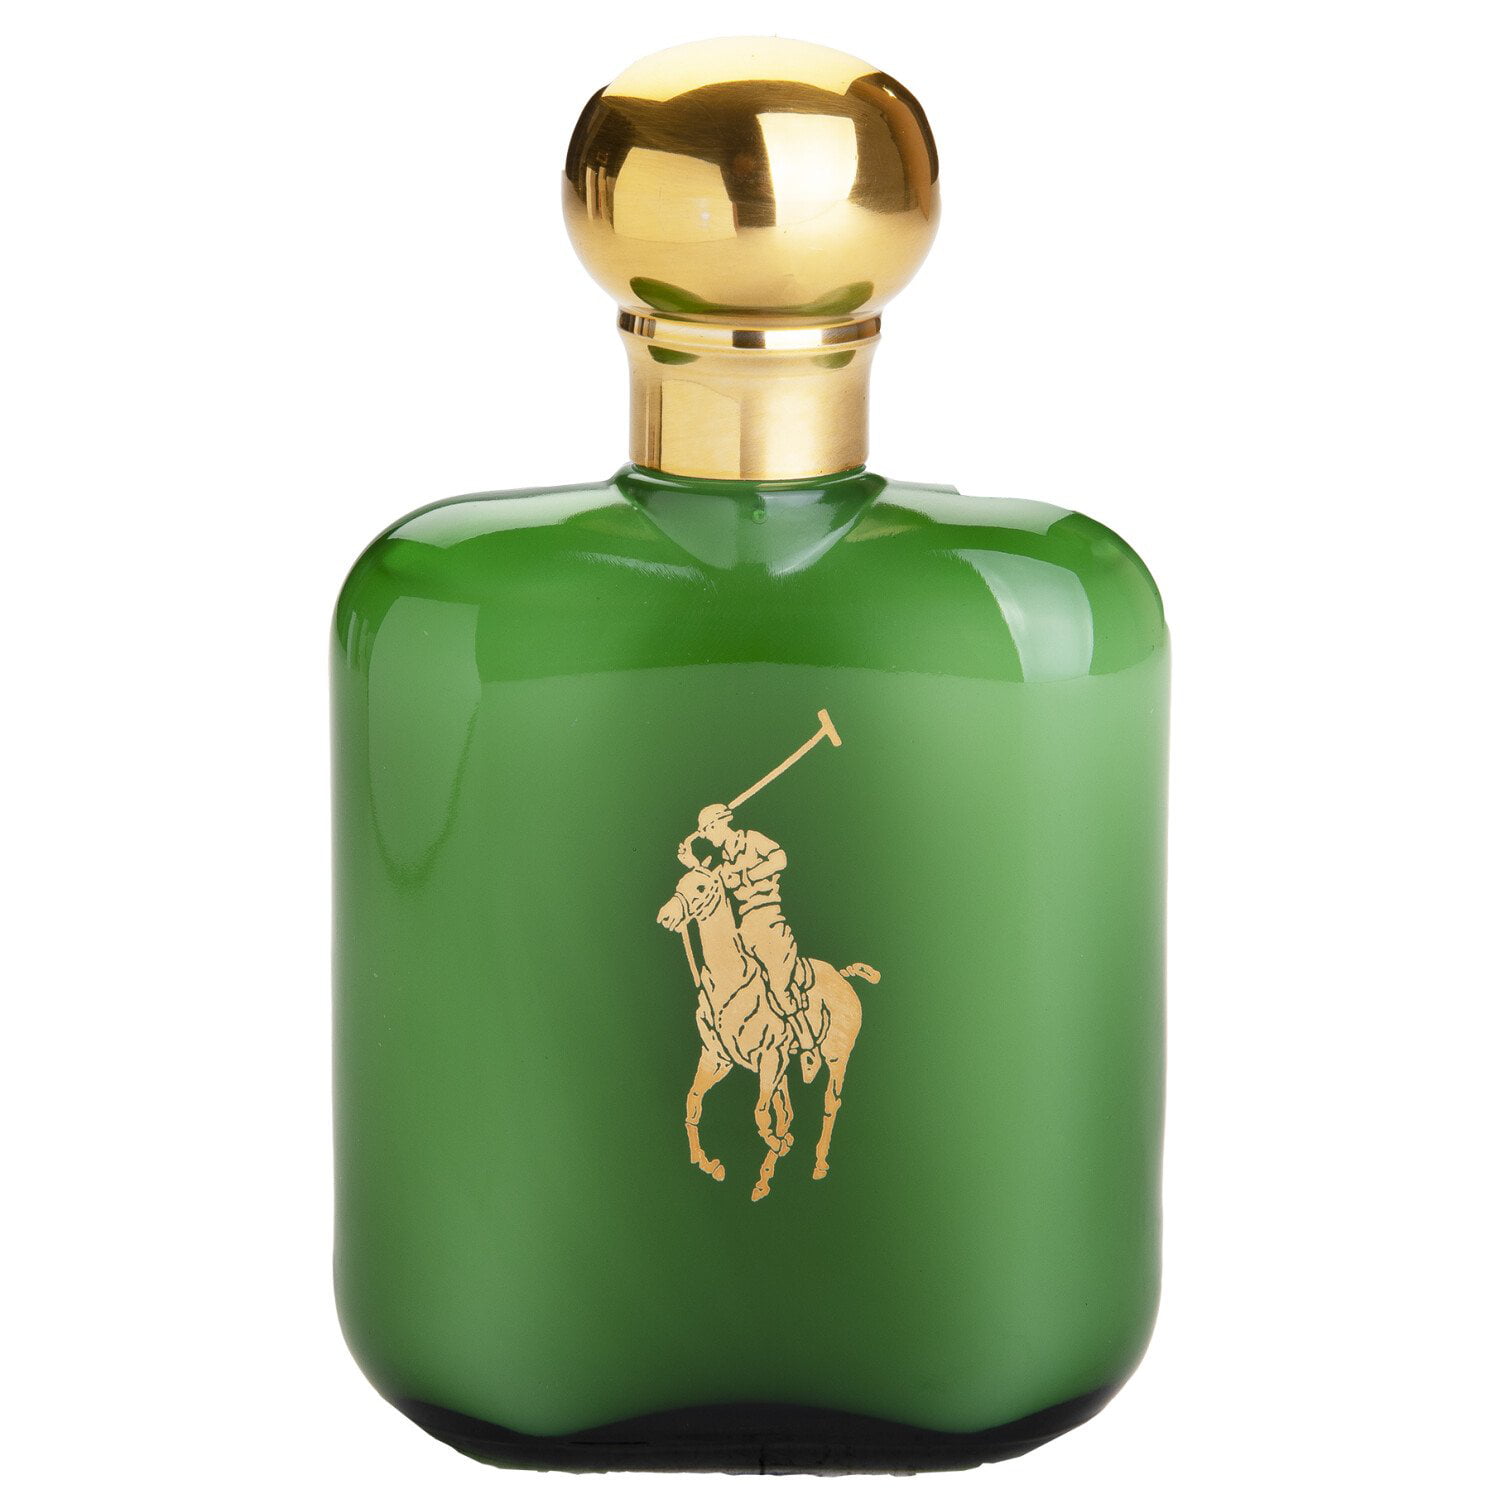 polo green after shave 8 oz,Save up to 15%,www.ilcascinone.com